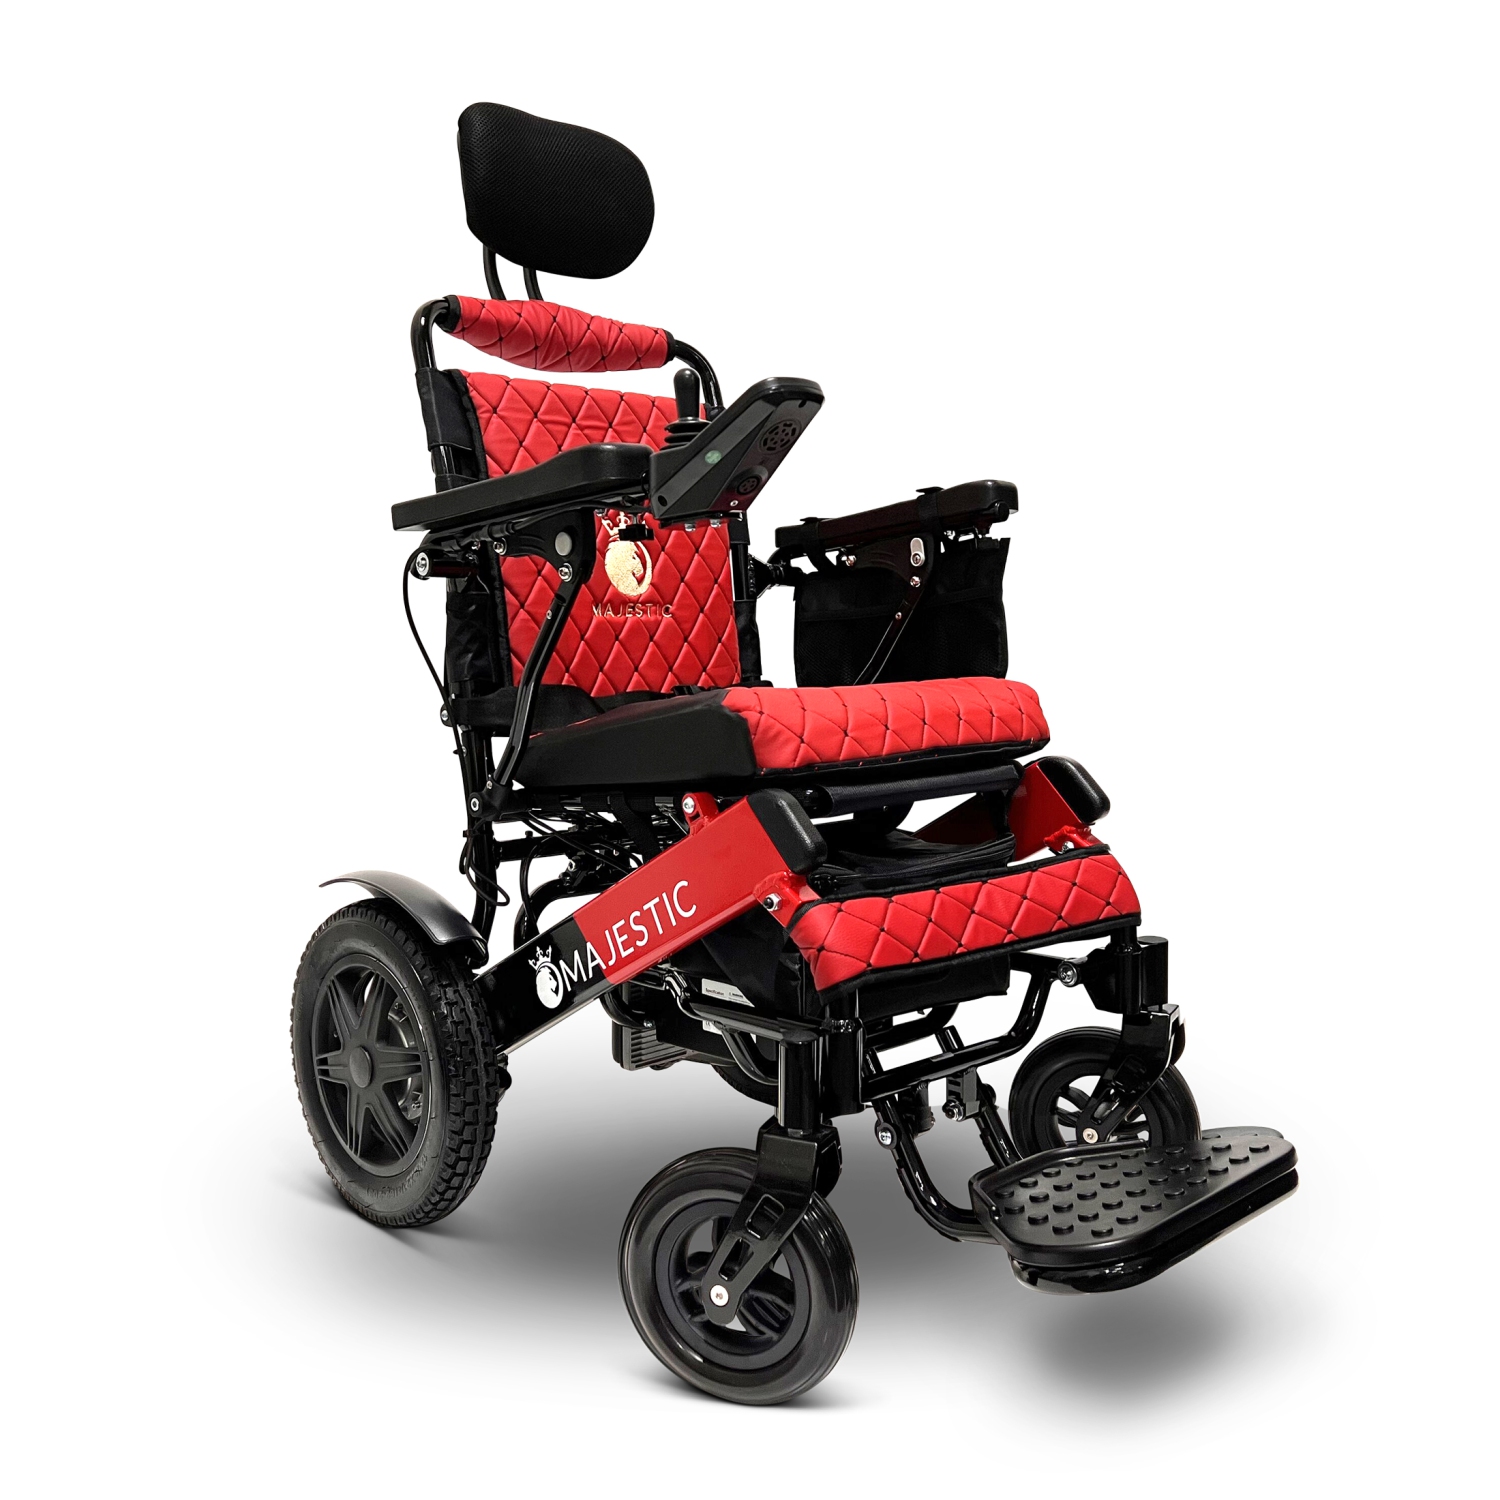 MAJESTIC IQ-9000 Airline Approved Luxury Electric Wheelchair | Auto Recline, LCD Joystick, Foldable, Up to 30 KM Range, Ultra-Light | 17’’ Seat Width, Red Frame, Red Textile